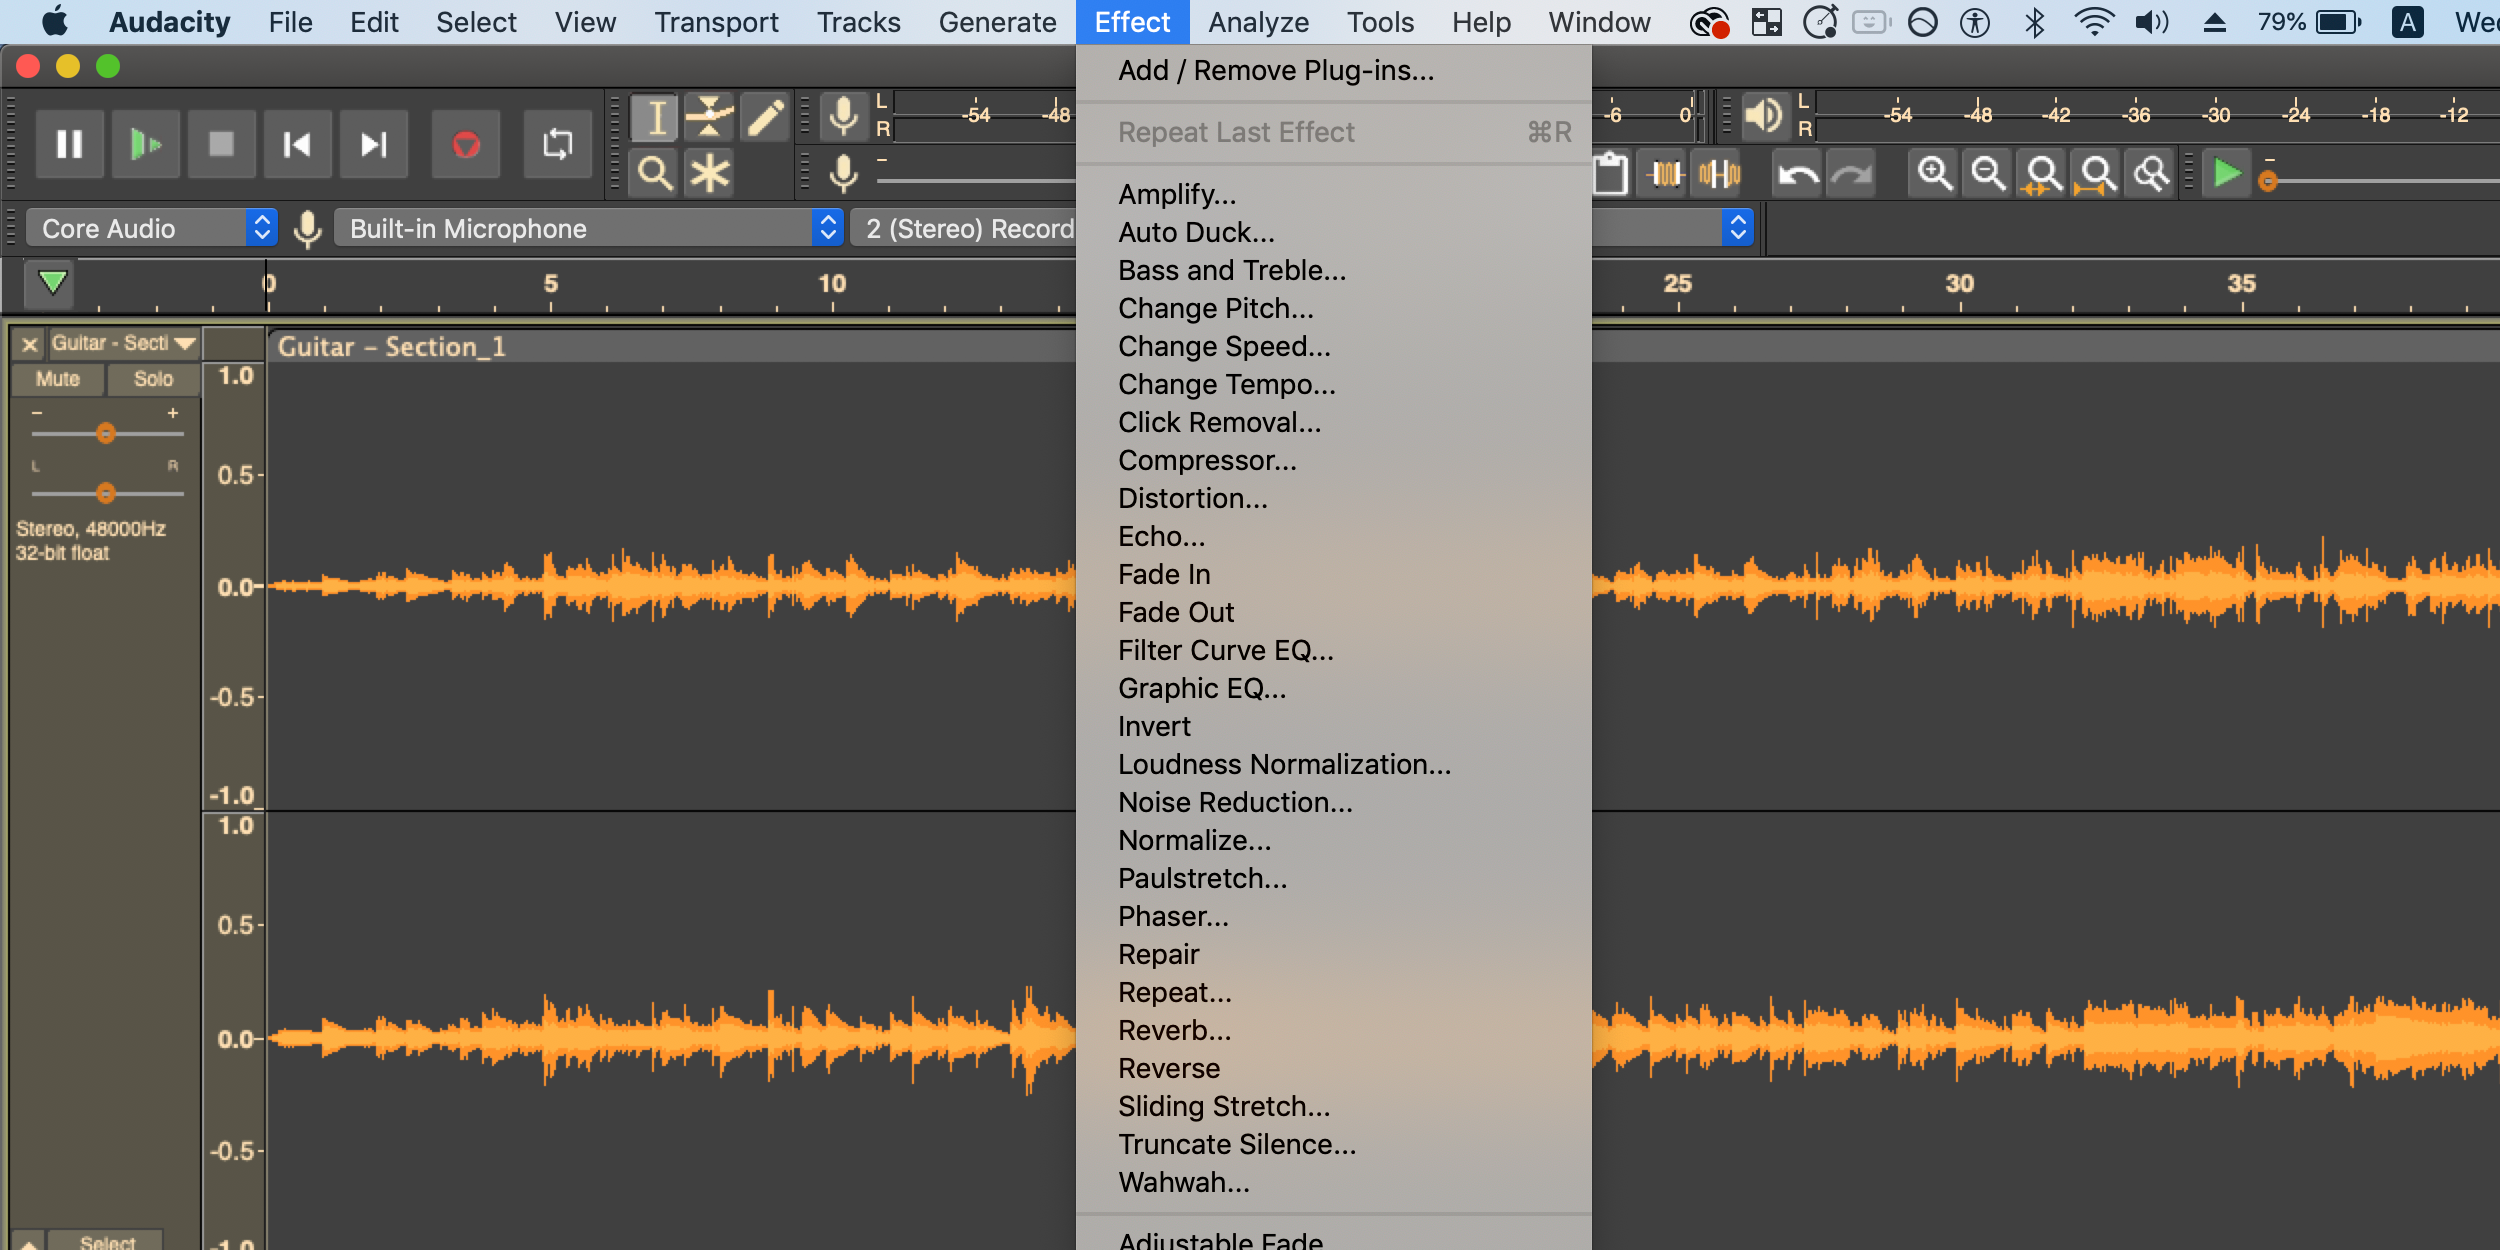 A screenshot of Audacity software with a dropdown menu showing effects plugins